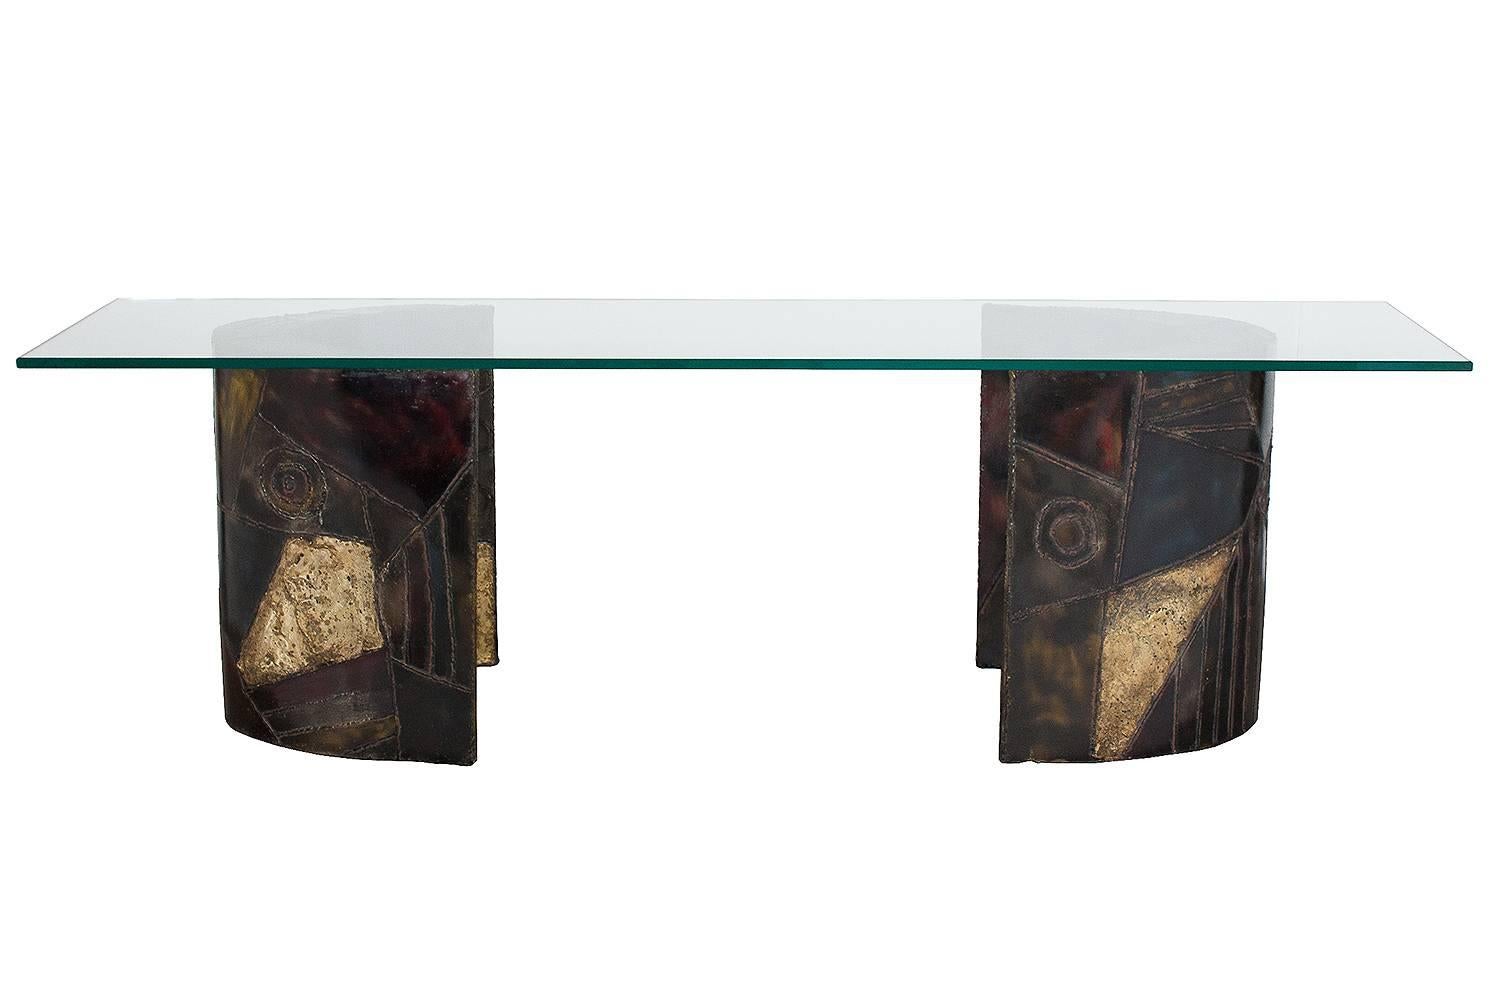 Paul Evans Studio PE-24 pedestal table for Directional. Two crescent shaped welded and enameled steel pedestal bases. Consider using as a dining table with a larger glass top. A 96" x 24" glass top is included as this was used as a console